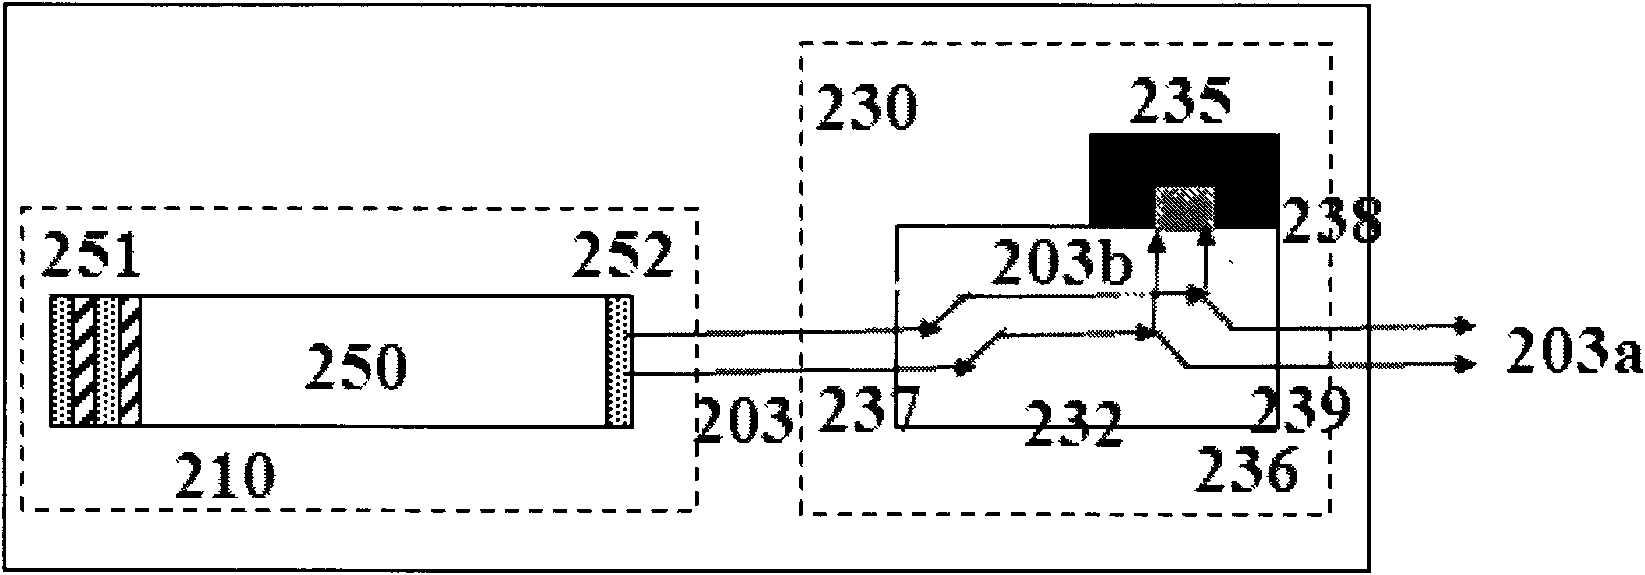 Semiconductor laser module, method for stabilizing and denoising semiconductor laser, and solid laser